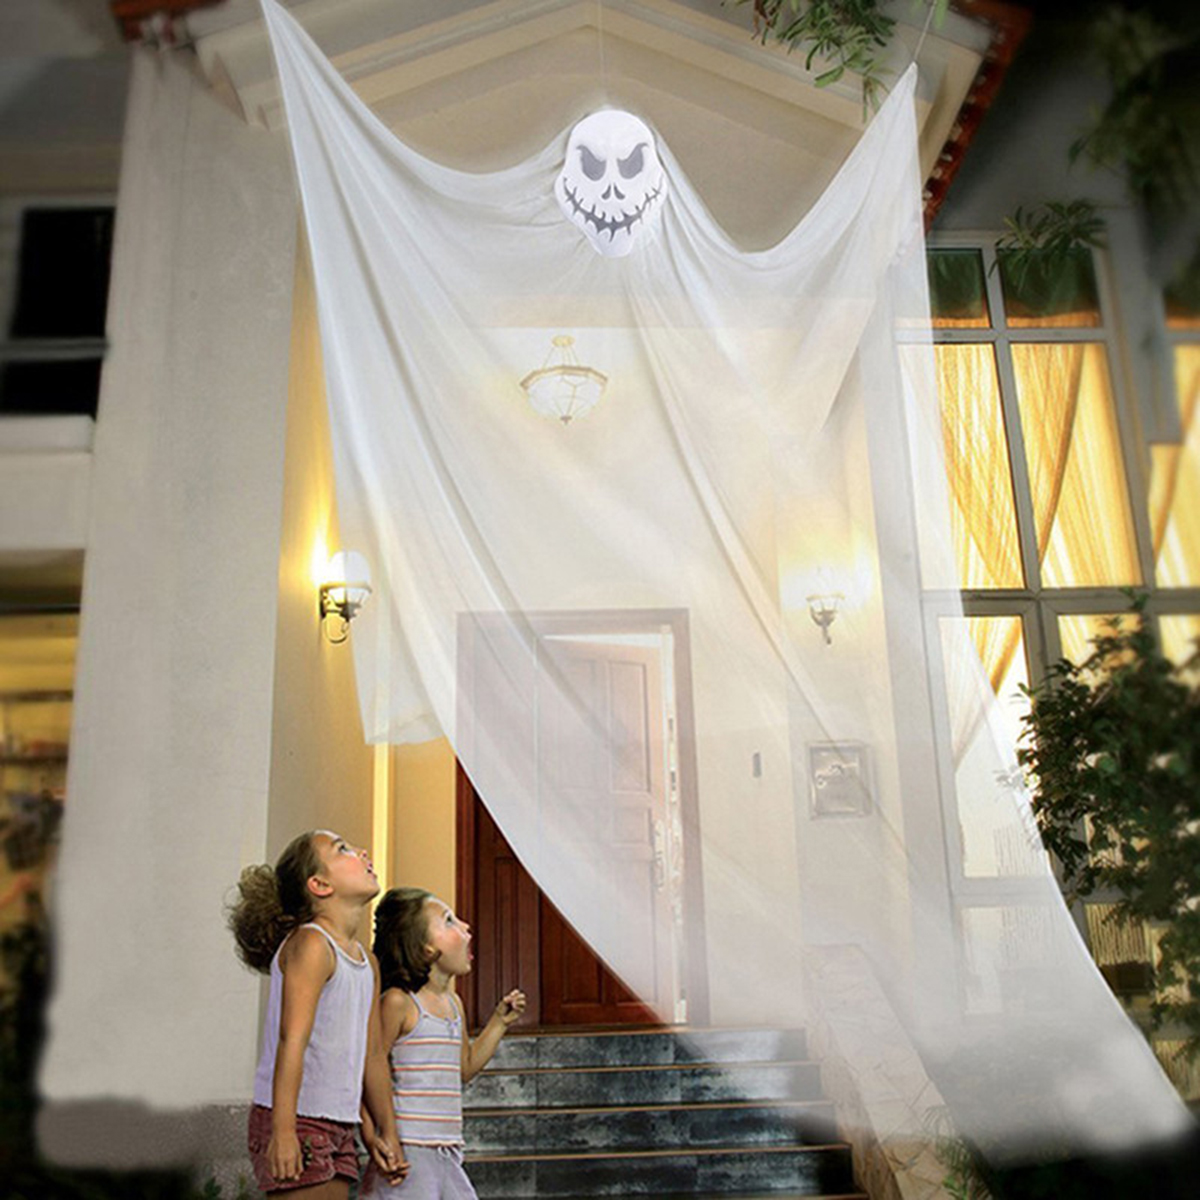 Halloween-Ghost-Decoration-Party-Hanging-Scary-Haunted-House-Prop-Indoor-Outdoor-1731519-10